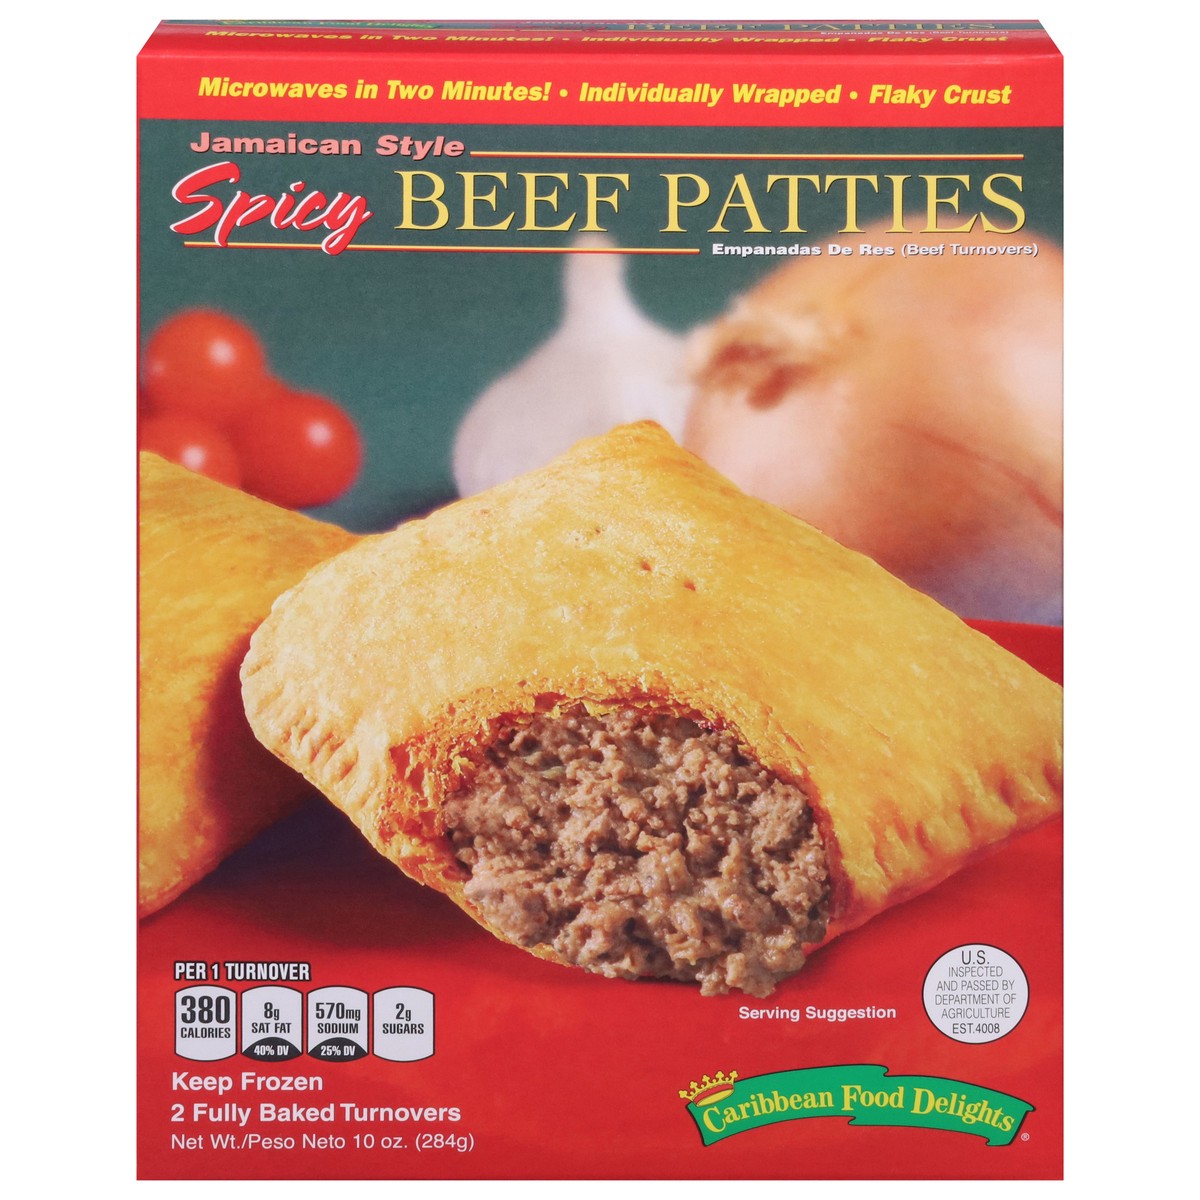 slide 17 of 17, Caribbean Food Delights Jamaican Style Spicy Beef Patties Turnovers 2 ea, 2 ct